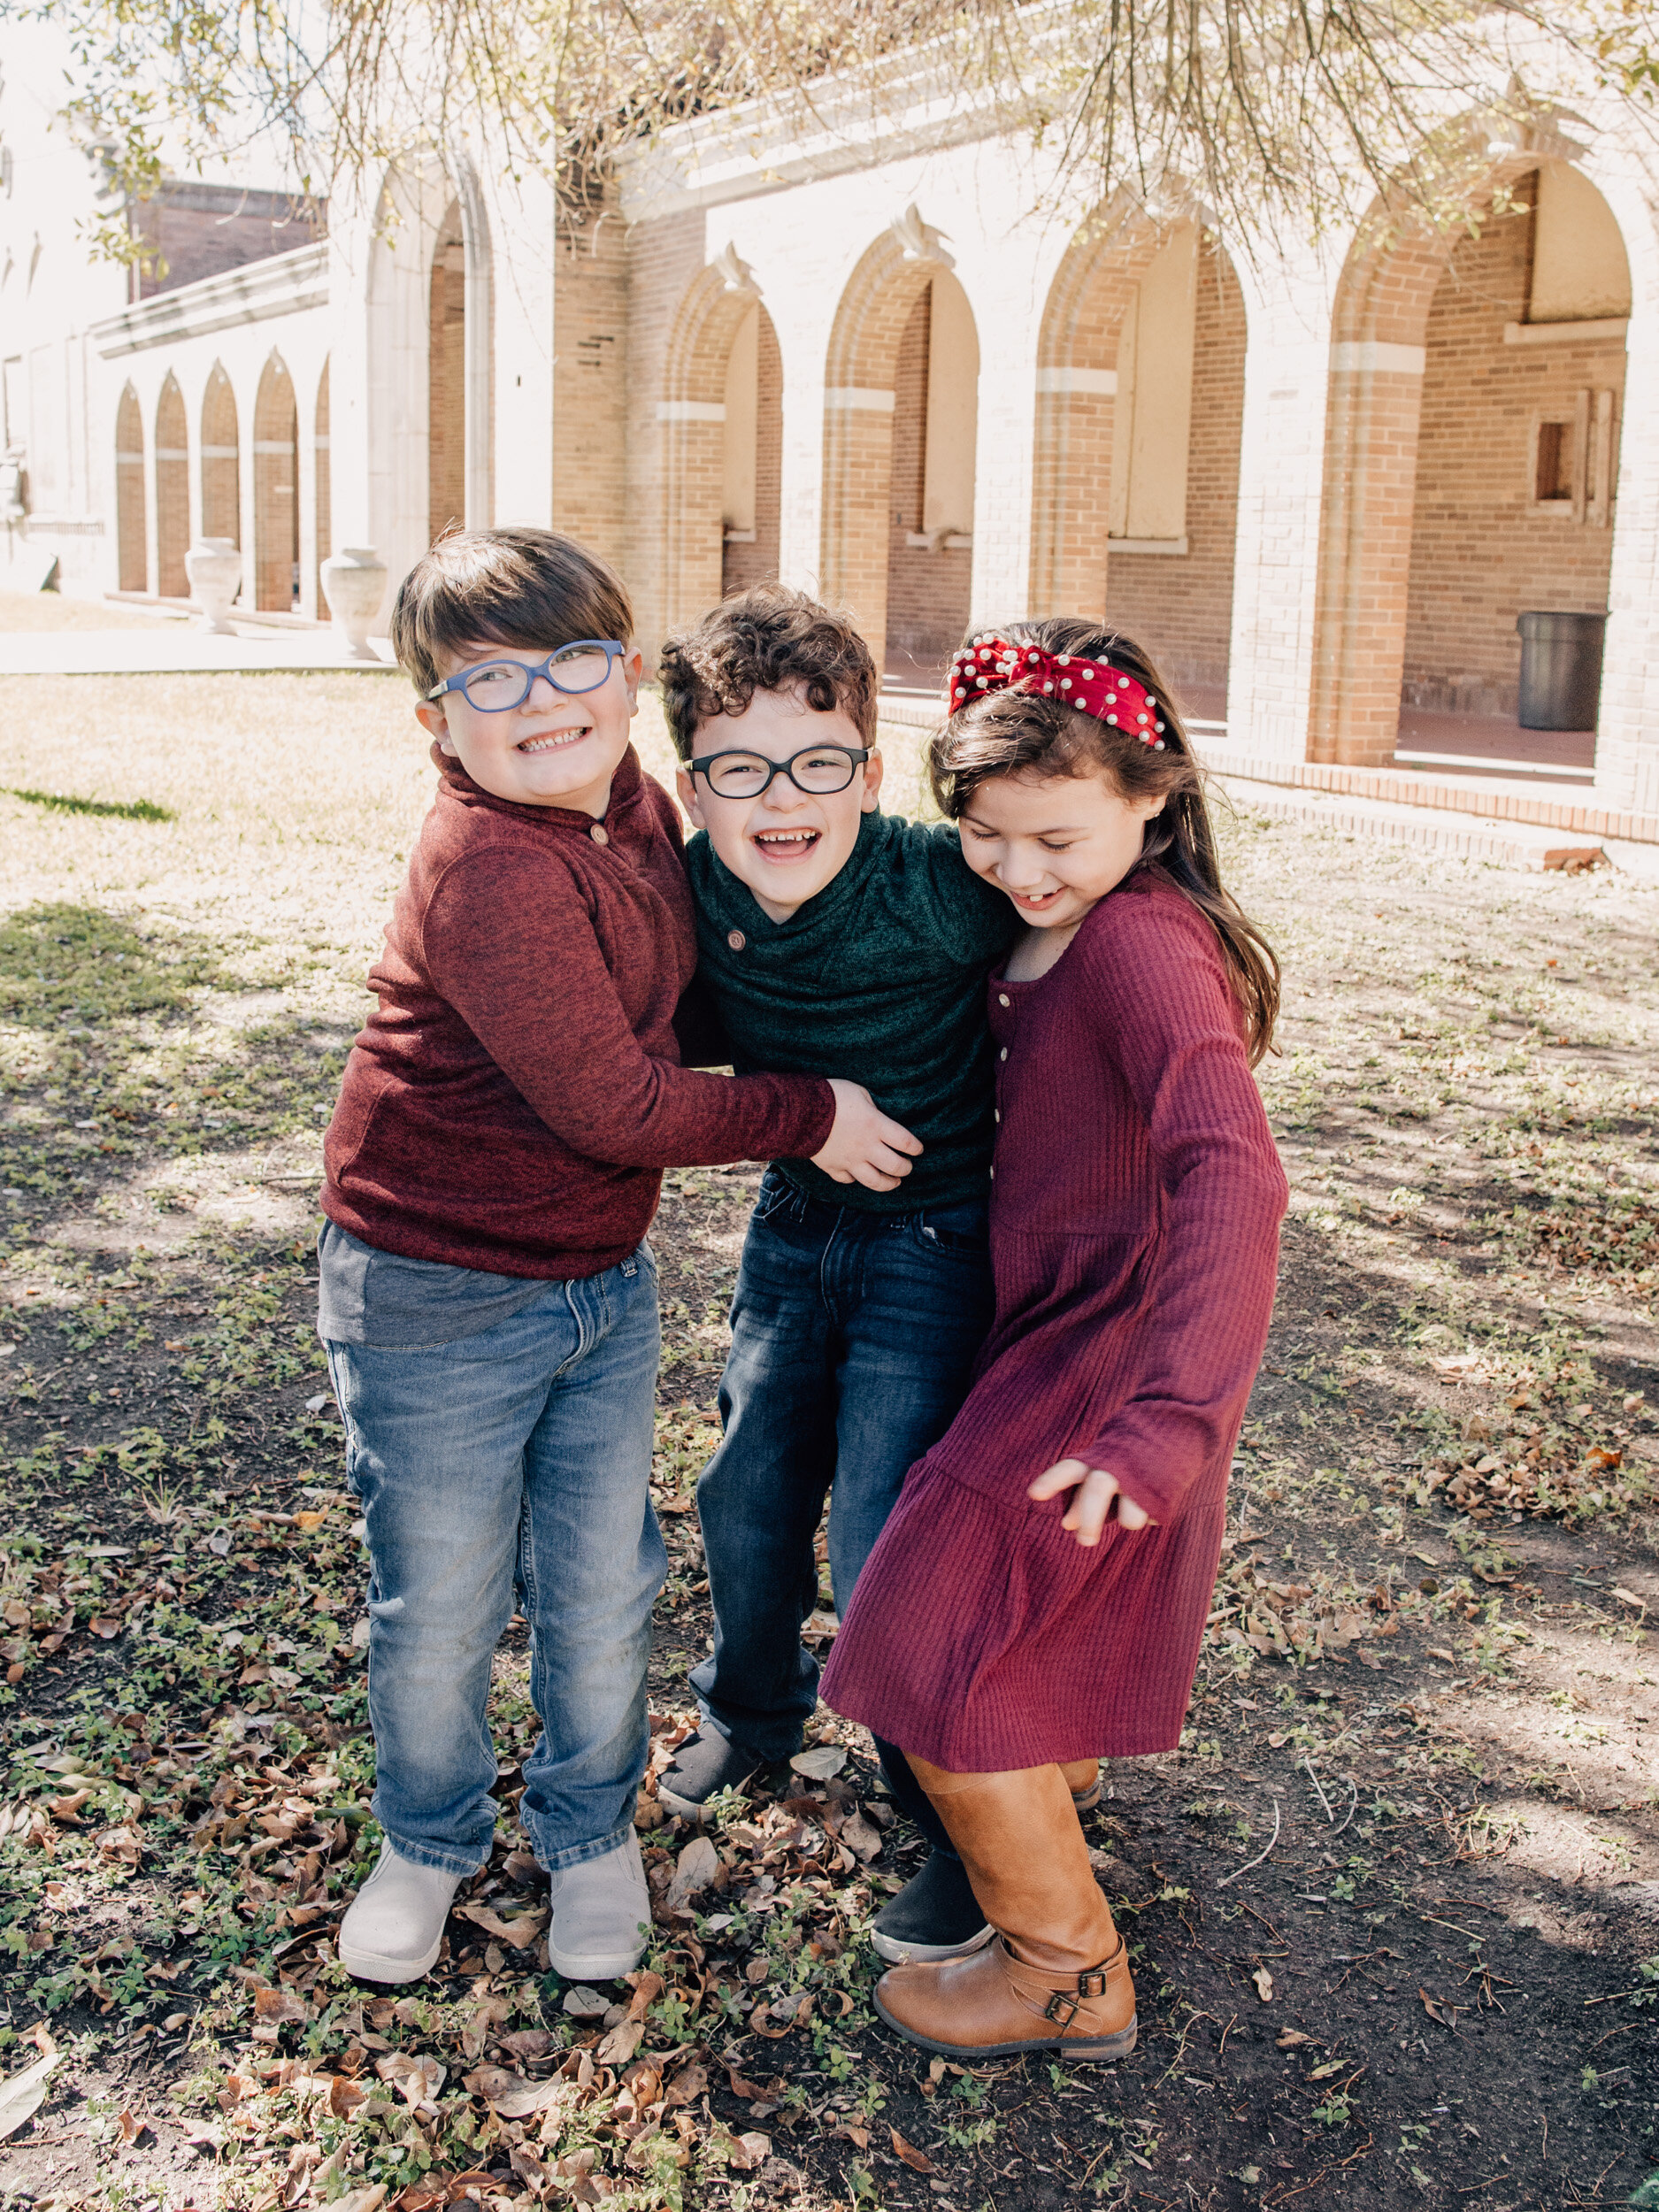 two-boys-one-girl-giggle-in-front-of-arched-brick-building-in-edinburg-texas1.jpg